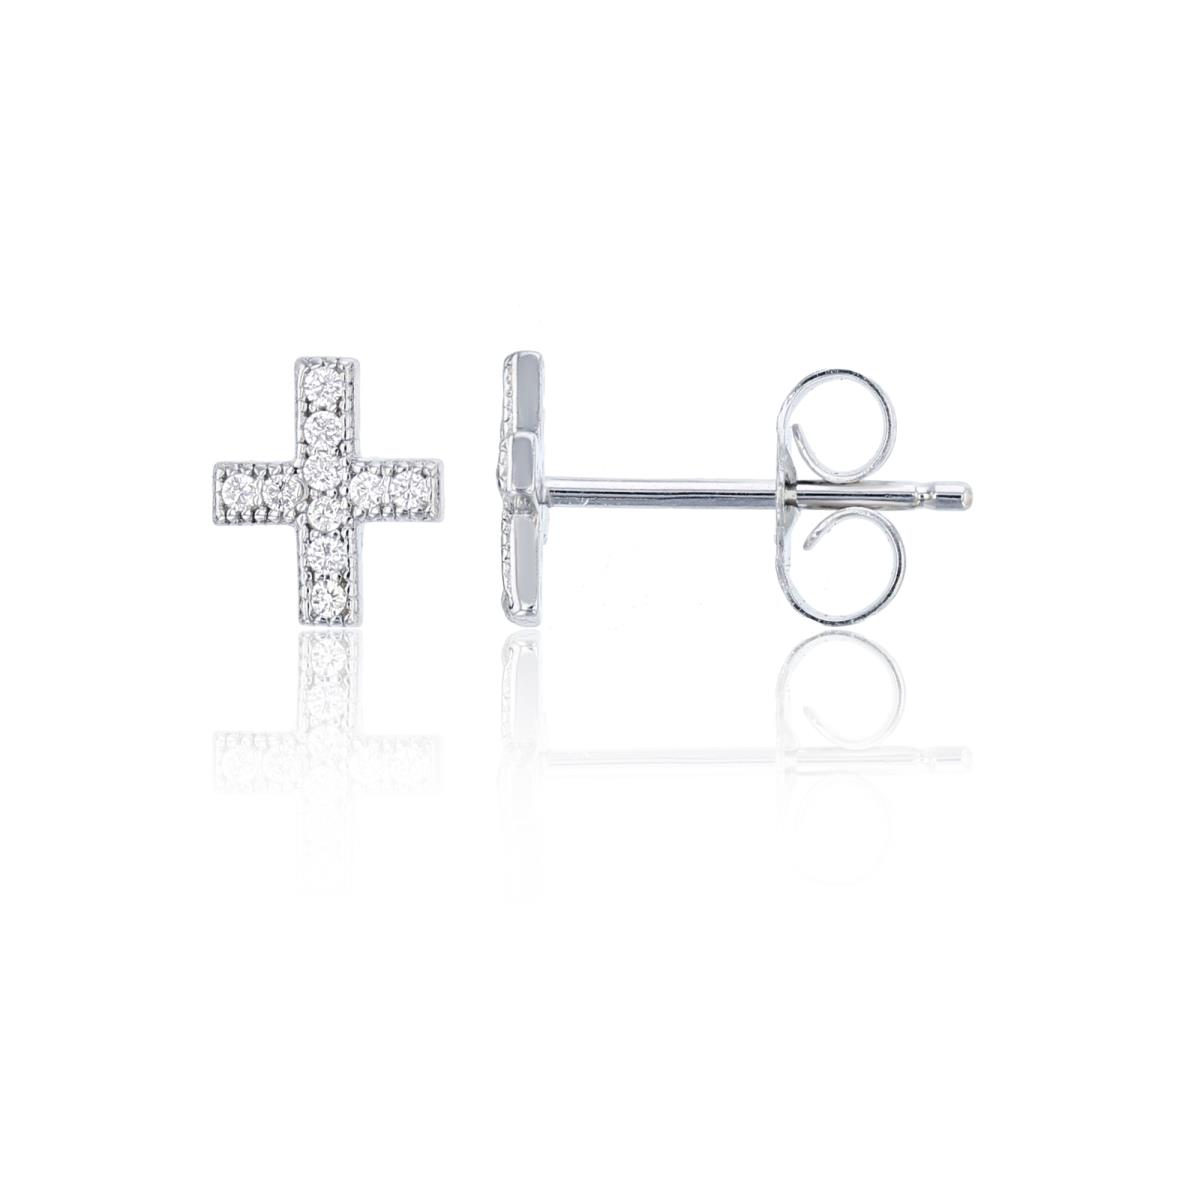 Sterling Silver 7.2x7.2mm Micorpave Petite Cross Stud Earring